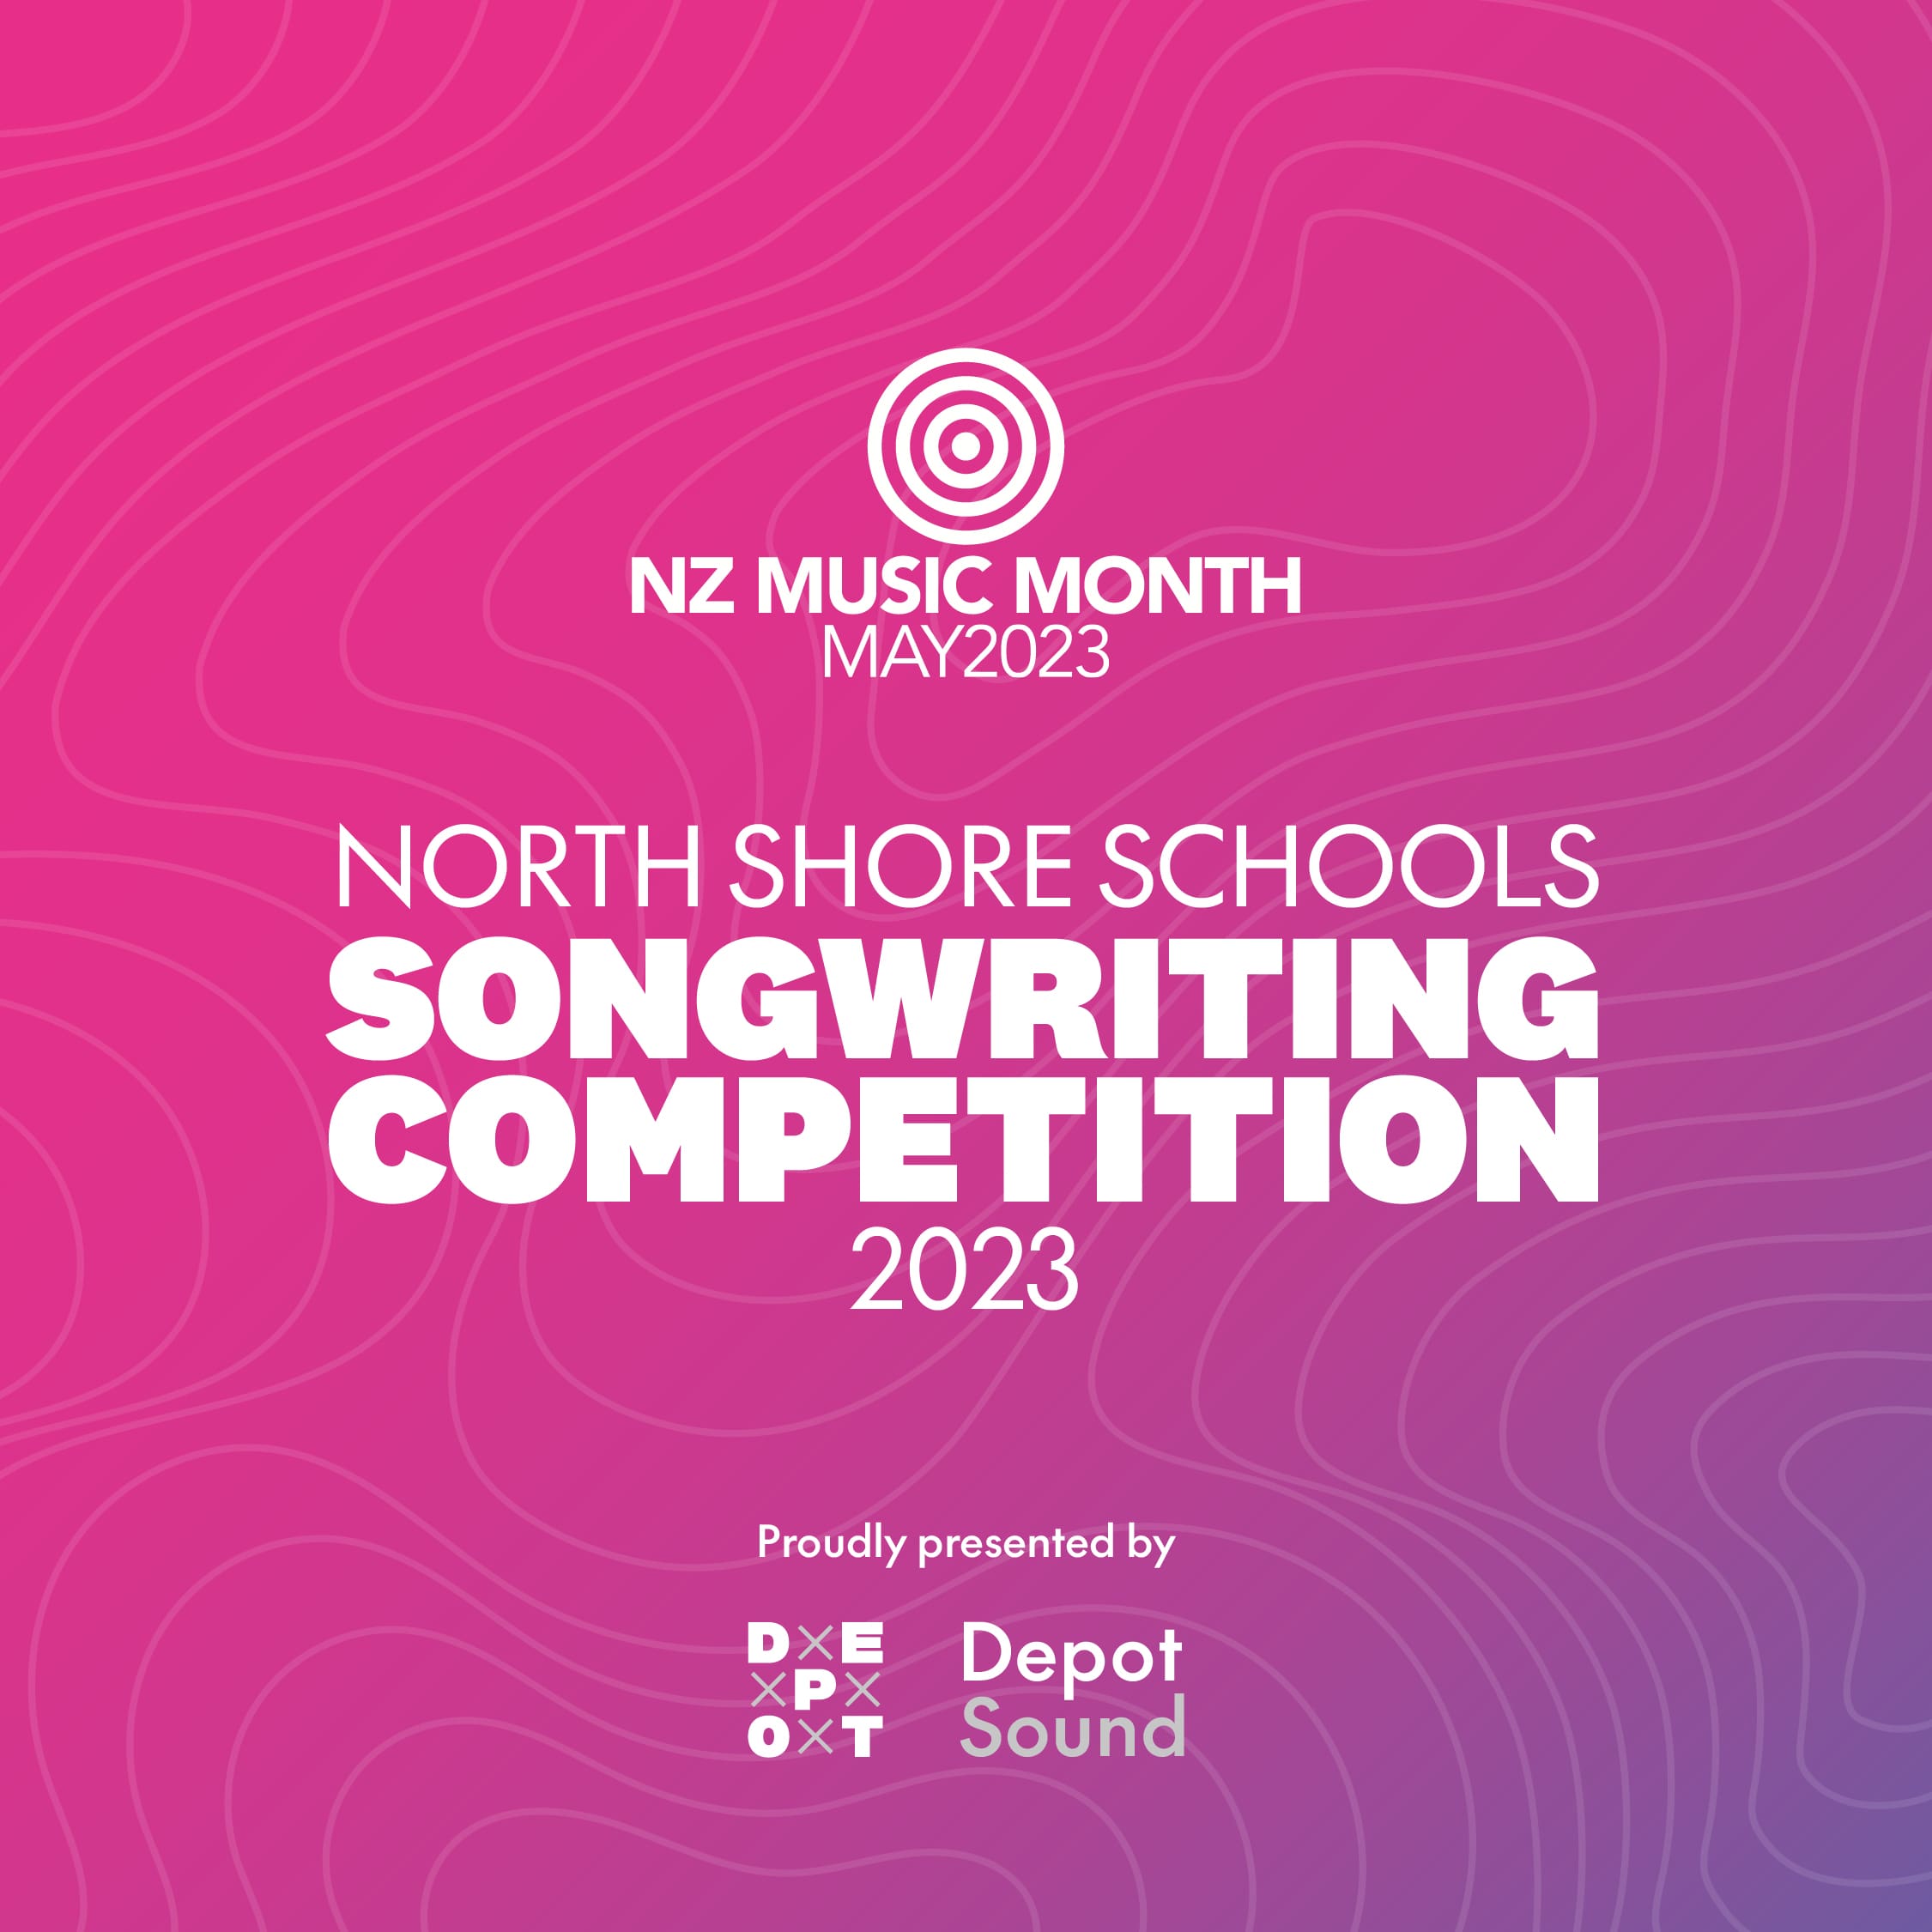 Thumbnail image for DEPOT Sound's North Shore Schools Songwriting Competition 2023, as part of NZ Music Month 2023.